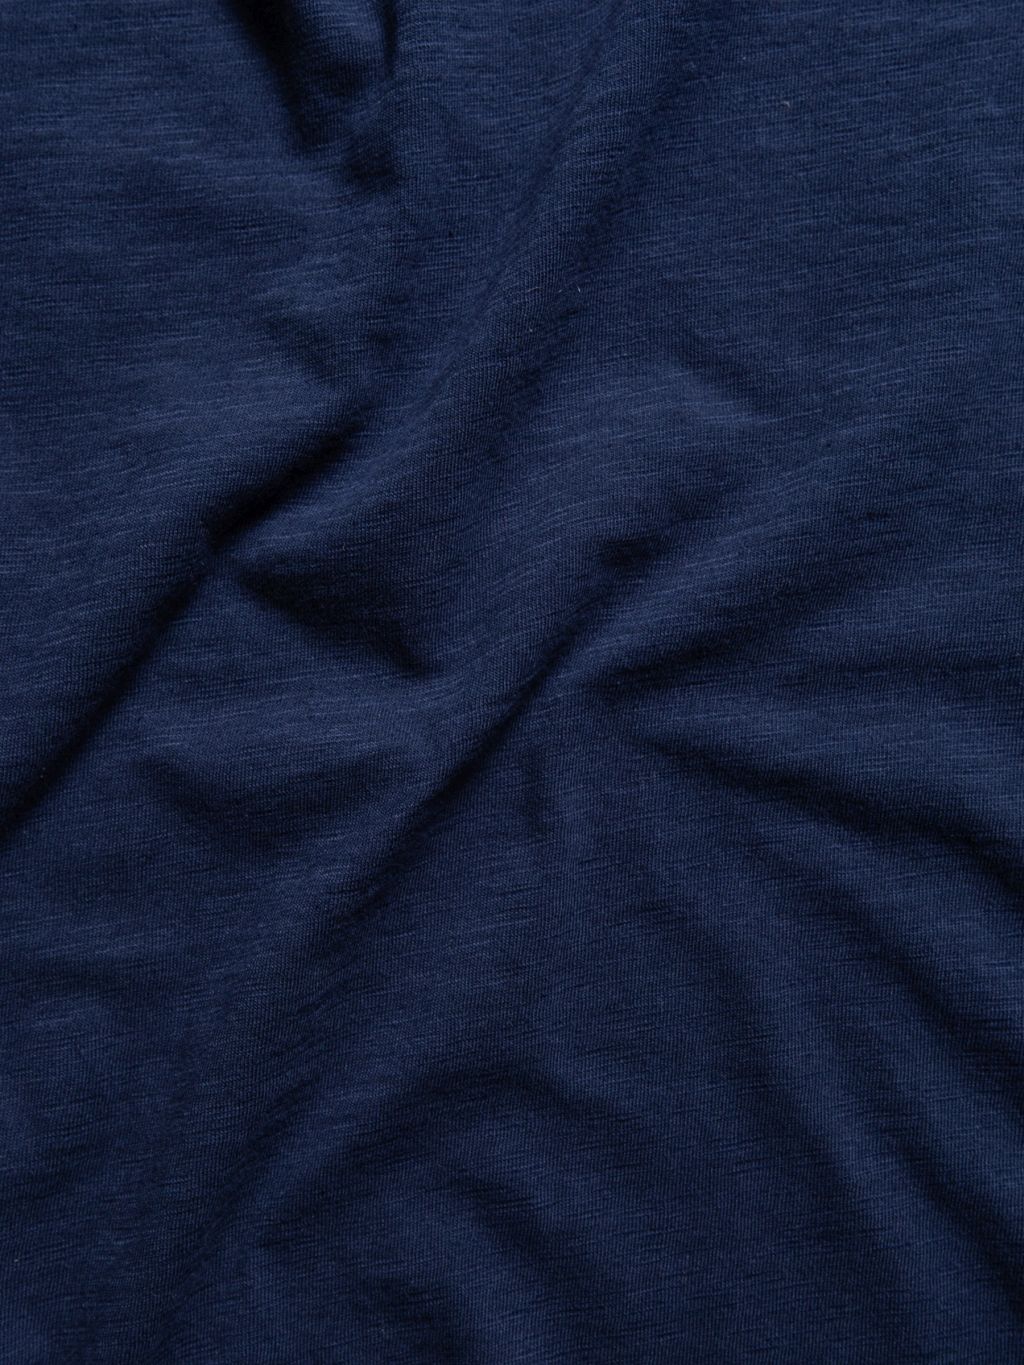 Roffe T-Shirt French Blue M